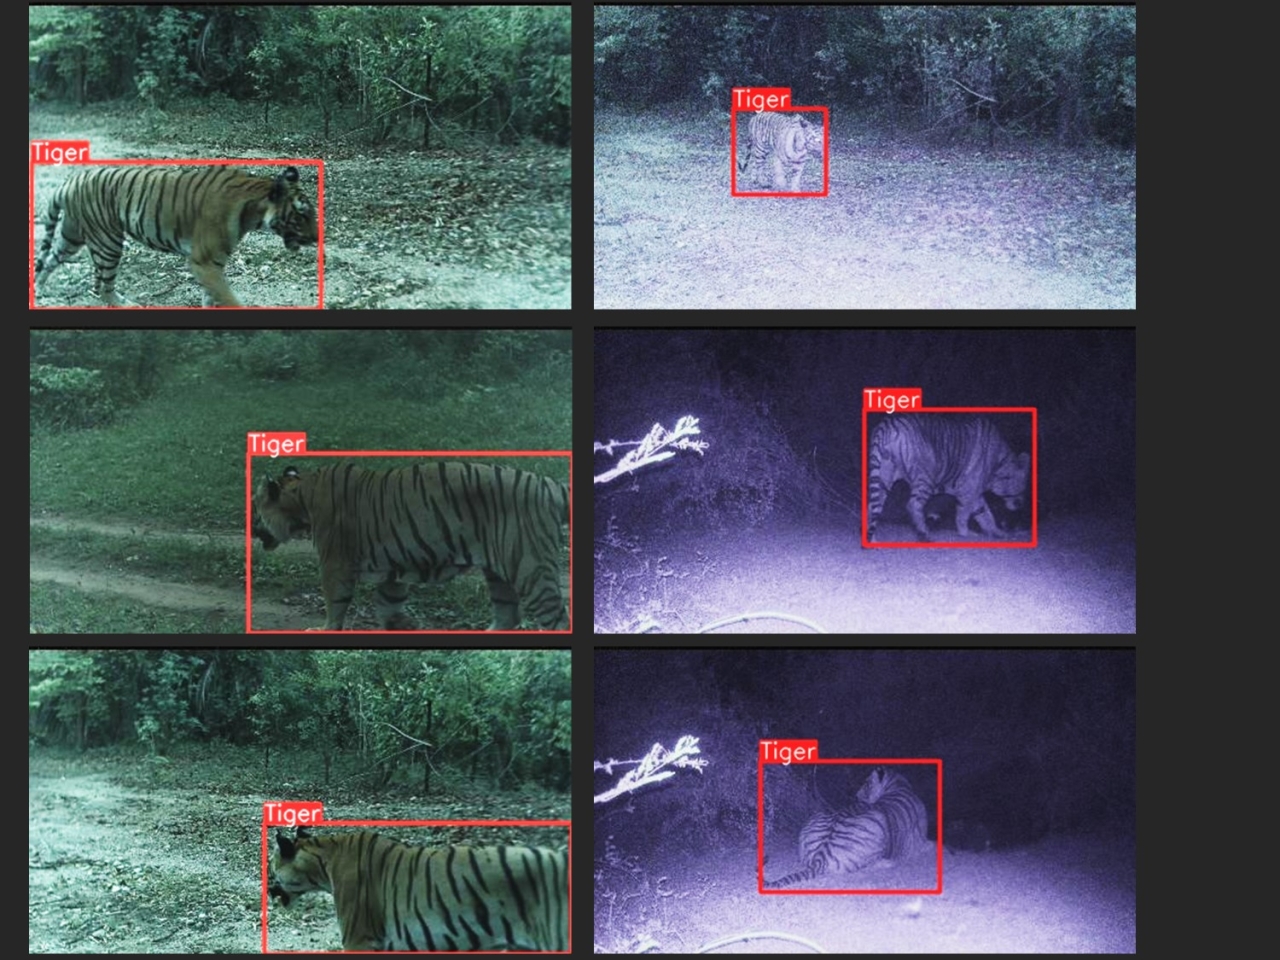 Tigers detected at night and during the day by trailguard ai. Image credit NTCA, Madhya Pradesh Forest Department, Global Tiger Forum, and RESOLVE.